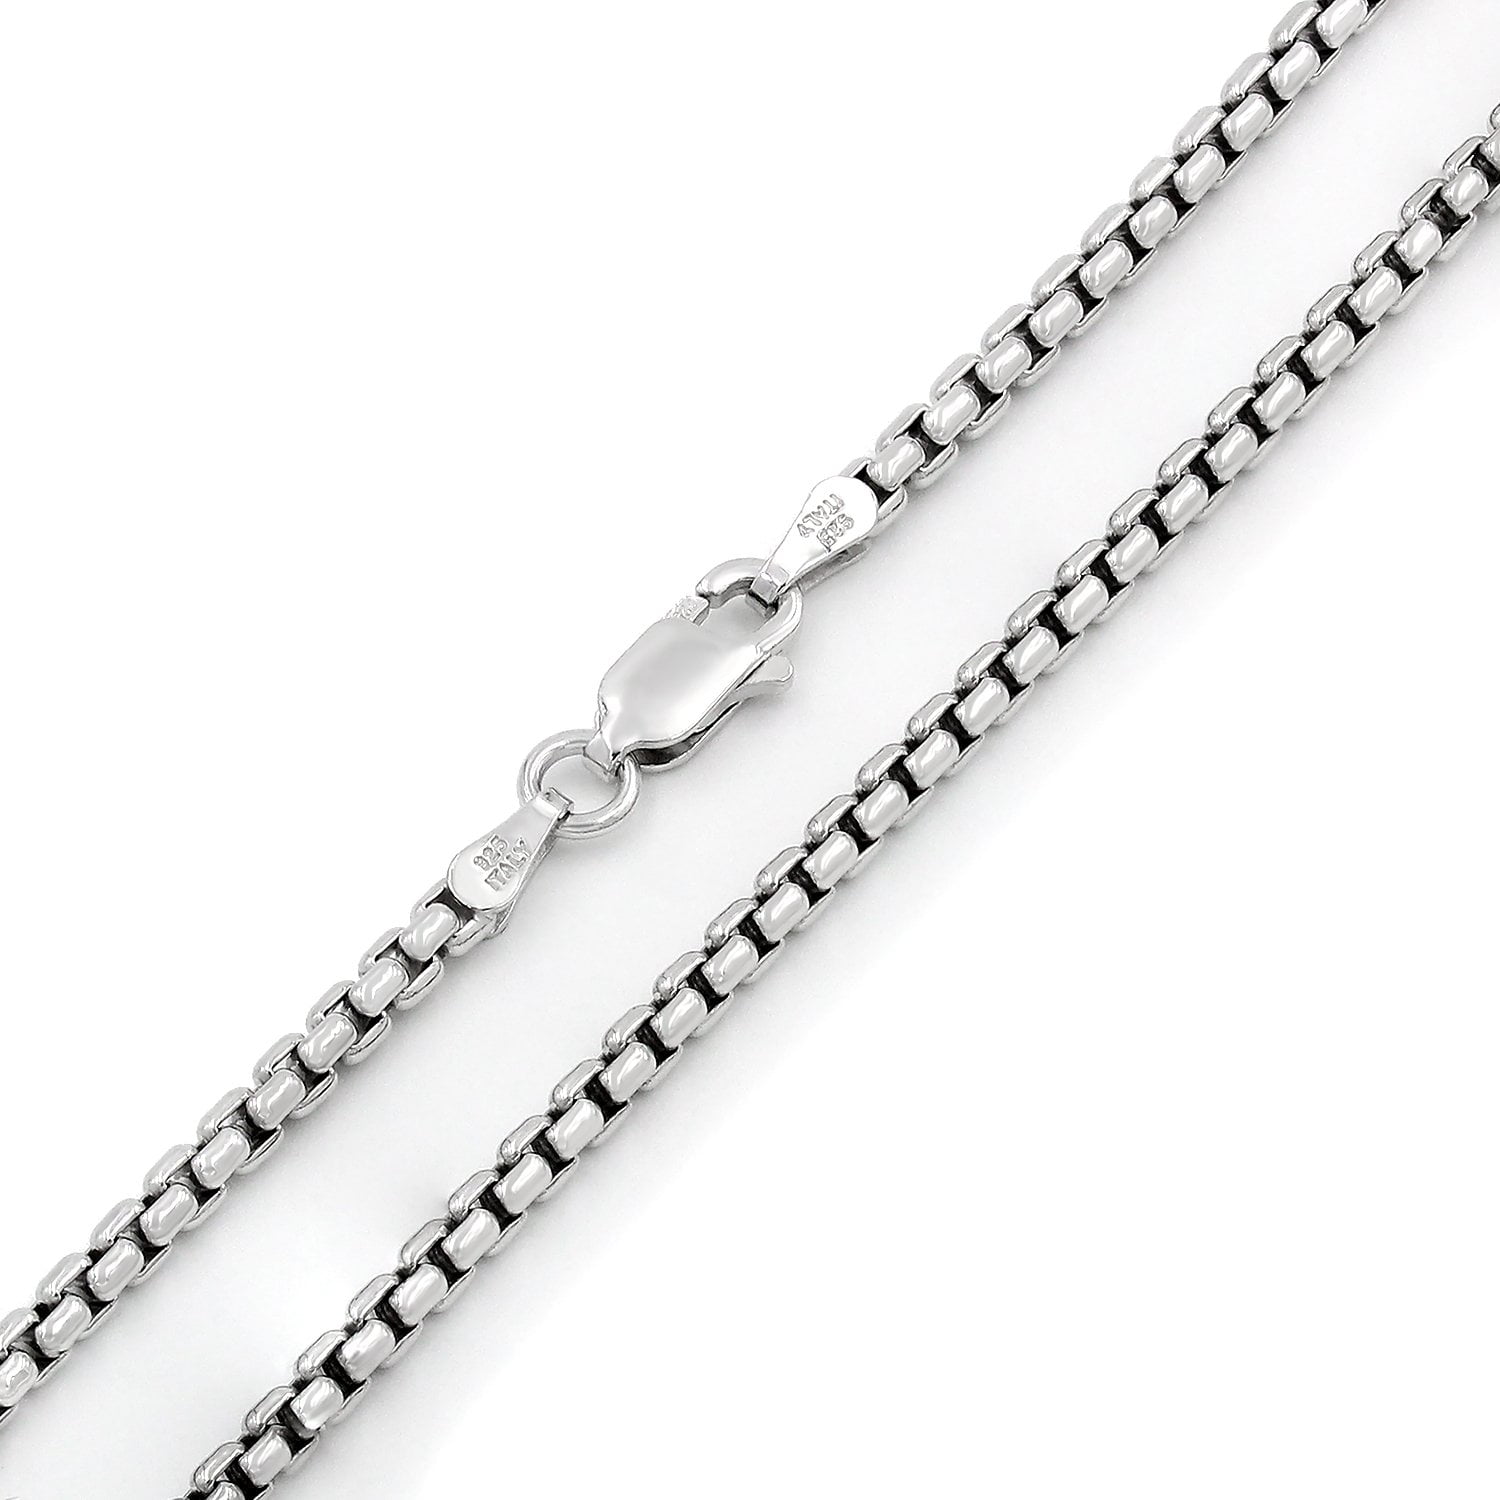 Solid 925 Sterling Silver 1.5mm Mirror Box Chain Necklace